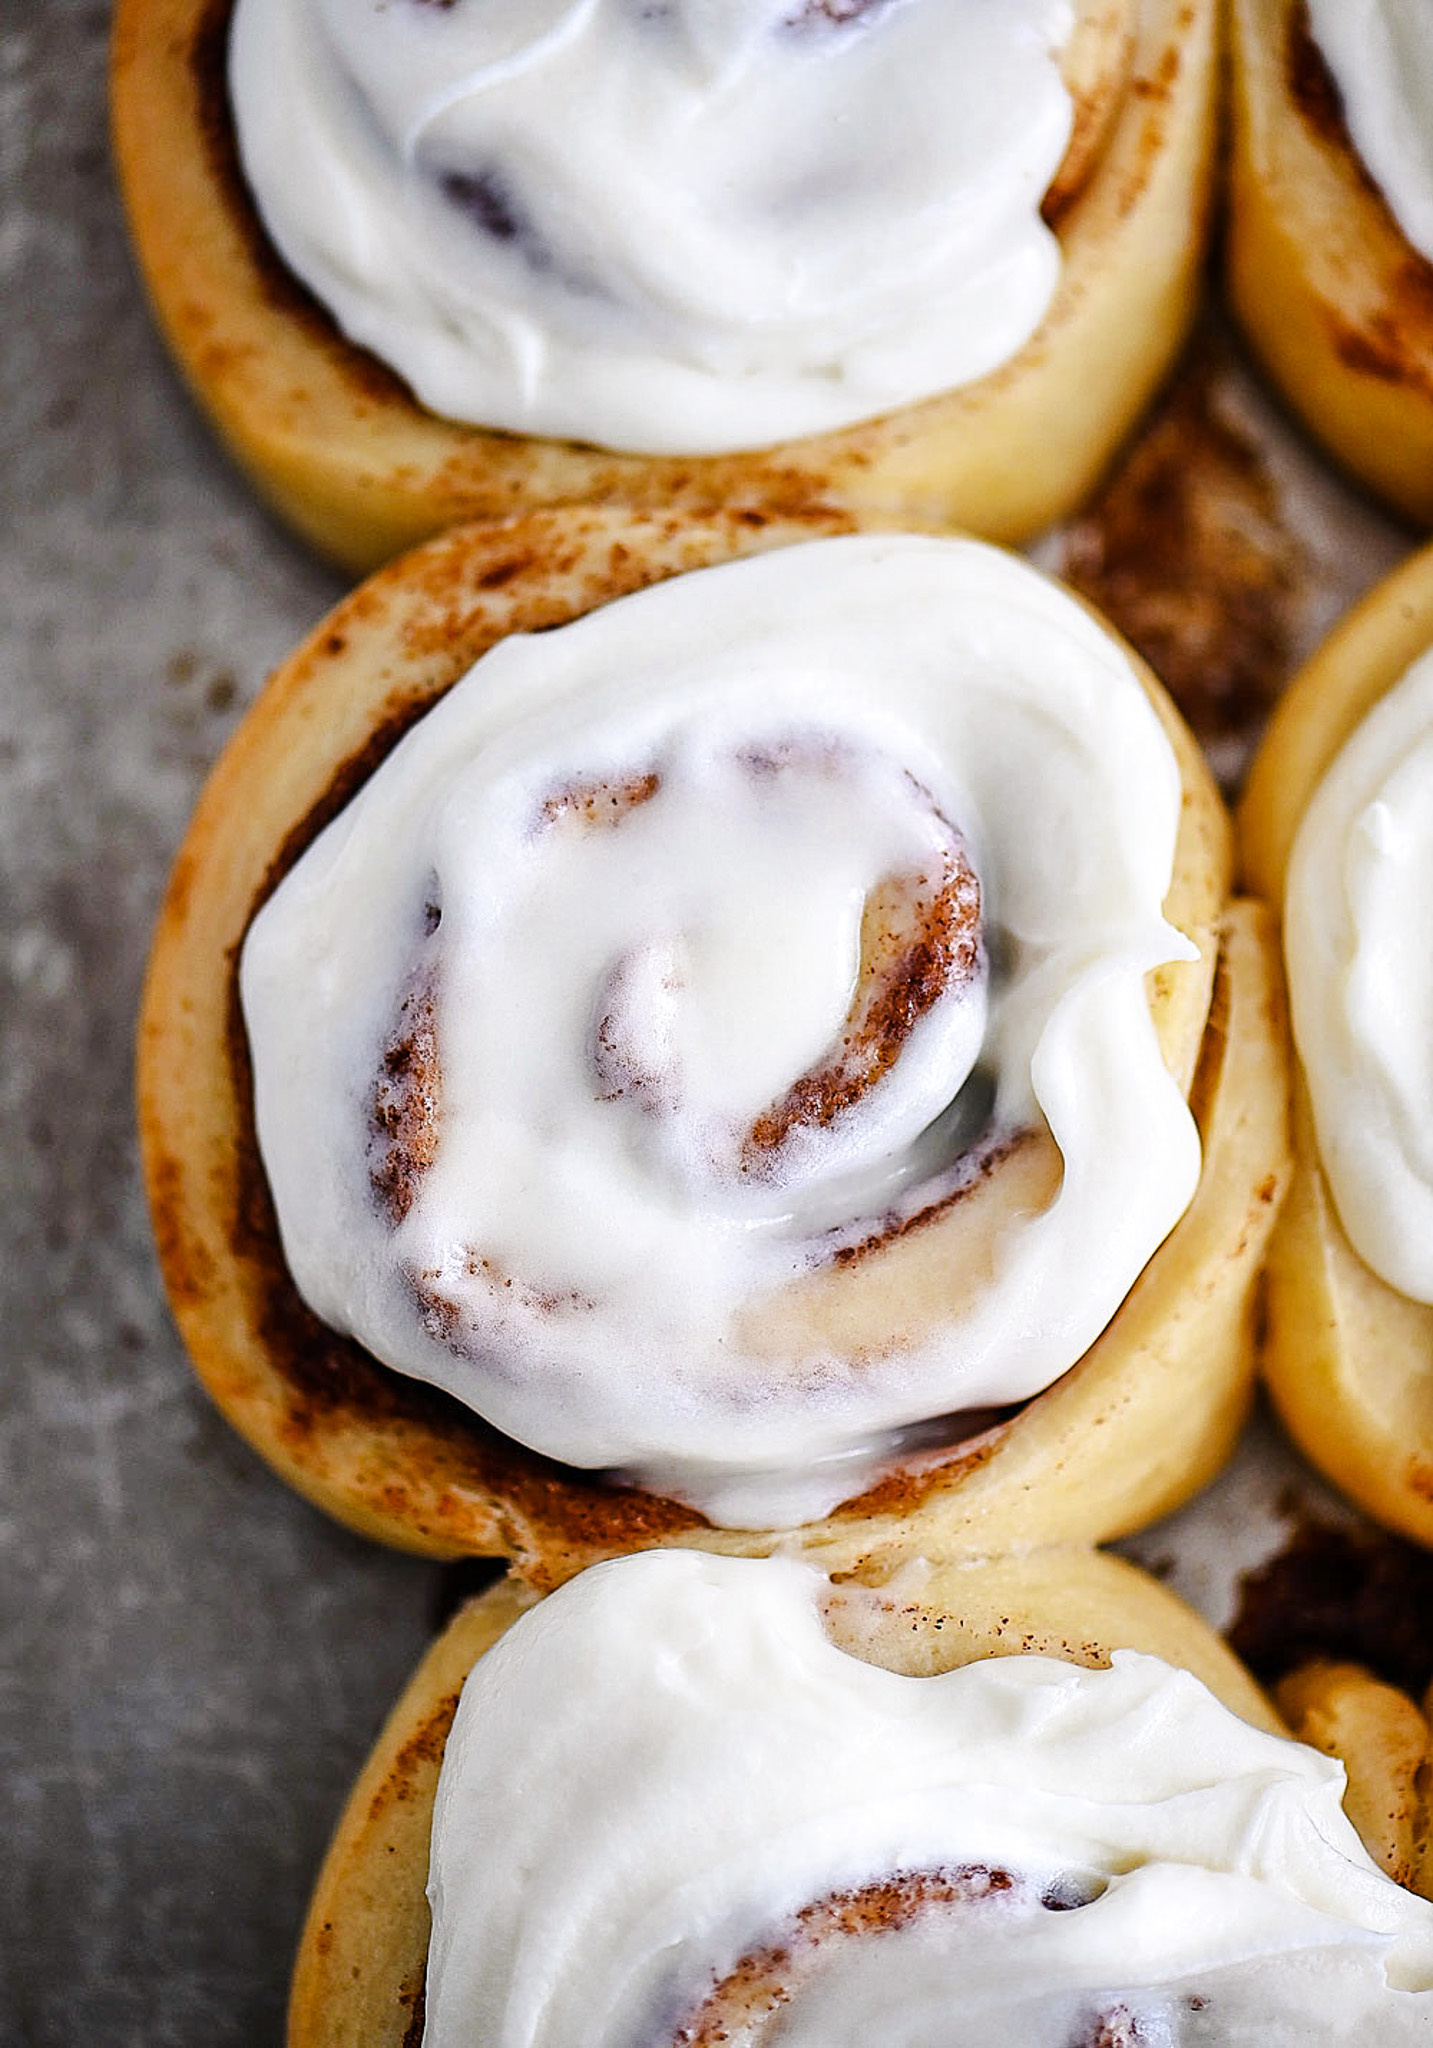 These copycat Cinnabon Cinnamon Rolls are delicious, soft and taste like the ones from the famous chain. Life-in-the-Lofthouse.com